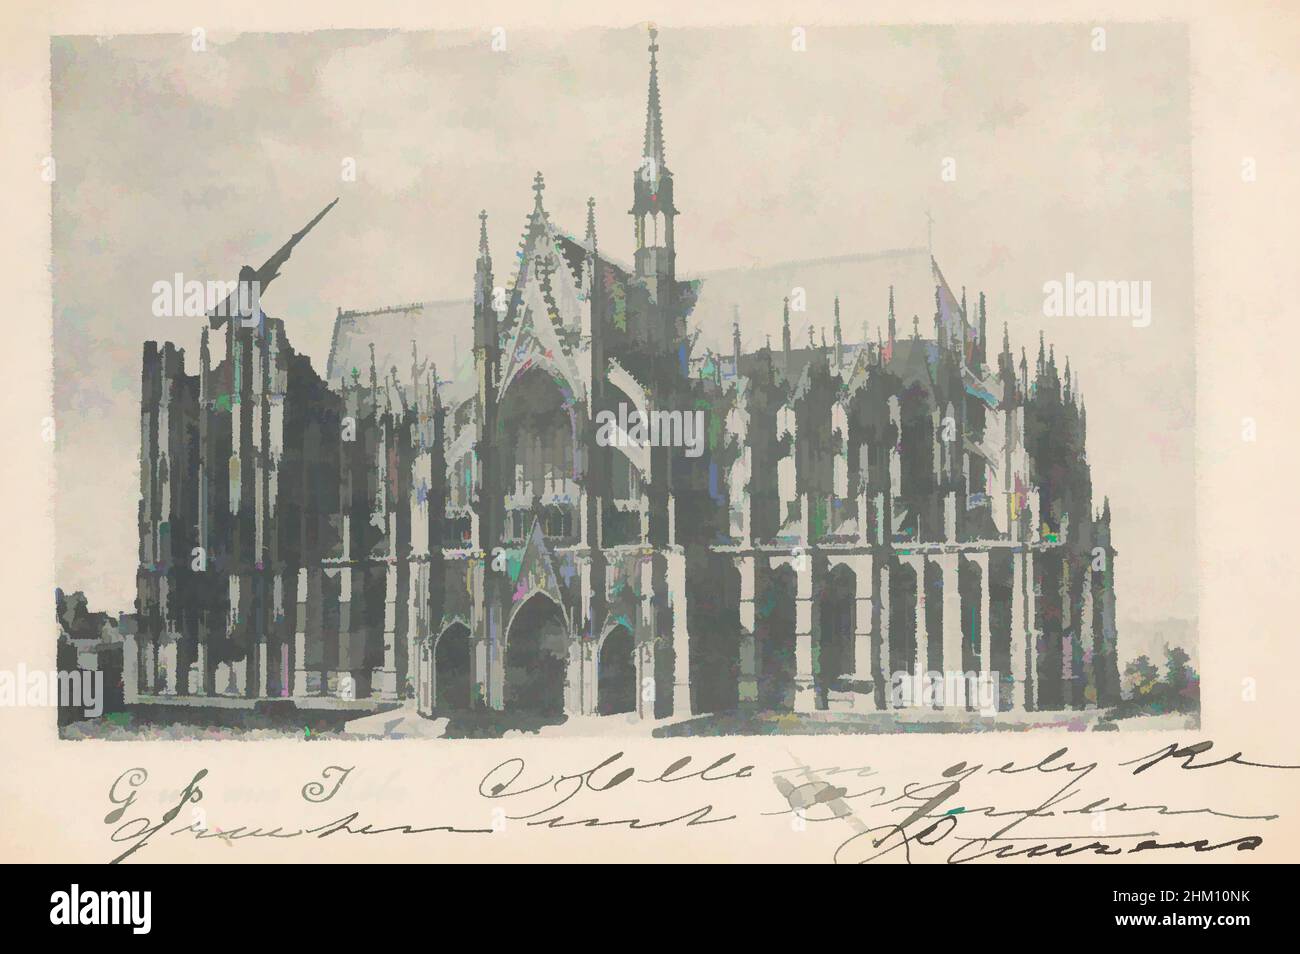 Art inspired by Der Dom im Jahre 1868, Gruss aus Köln, maker: F. Szesztokat, Cologne, 27-Sep-1909, cardboard, collotype, writing (processes), height 93 mm × width 143 mm, Classic works modernized by Artotop with a splash of modernity. Shapes, color and value, eye-catching visual impact on art. Emotions through freedom of artworks in a contemporary way. A timeless message pursuing a wildly creative new direction. Artists turning to the digital medium and creating the Artotop NFT Stock Photo